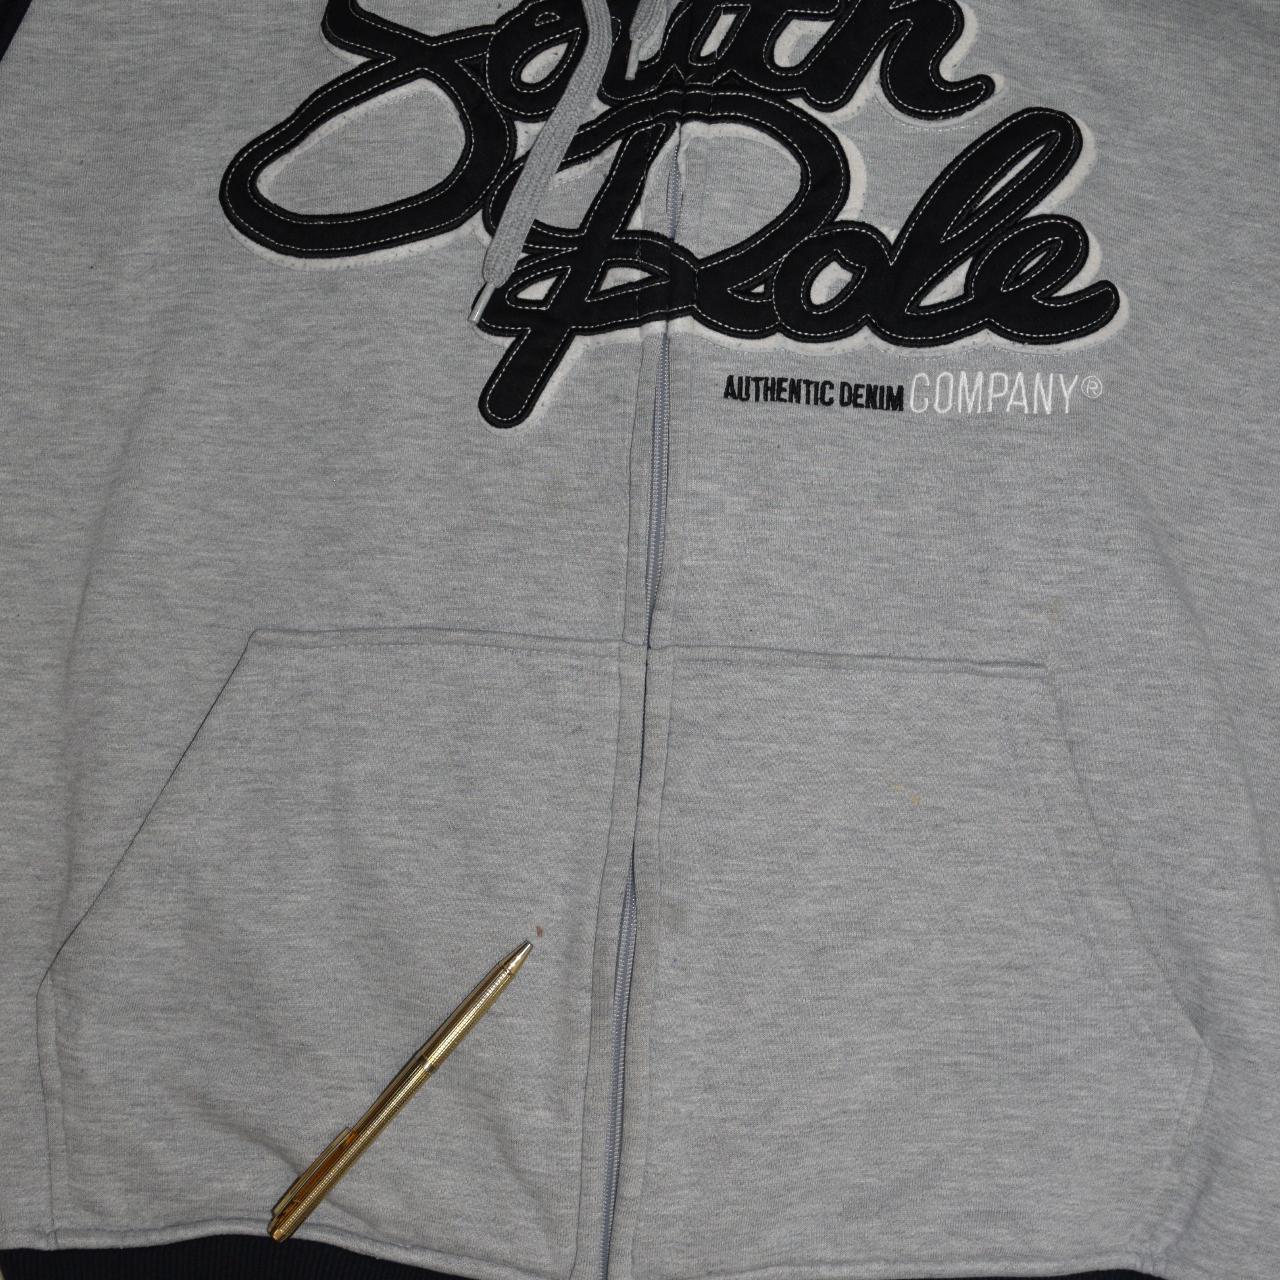 SOUTHPOLE ZIP UP HOODIE!! This zip up is so cool... - Depop